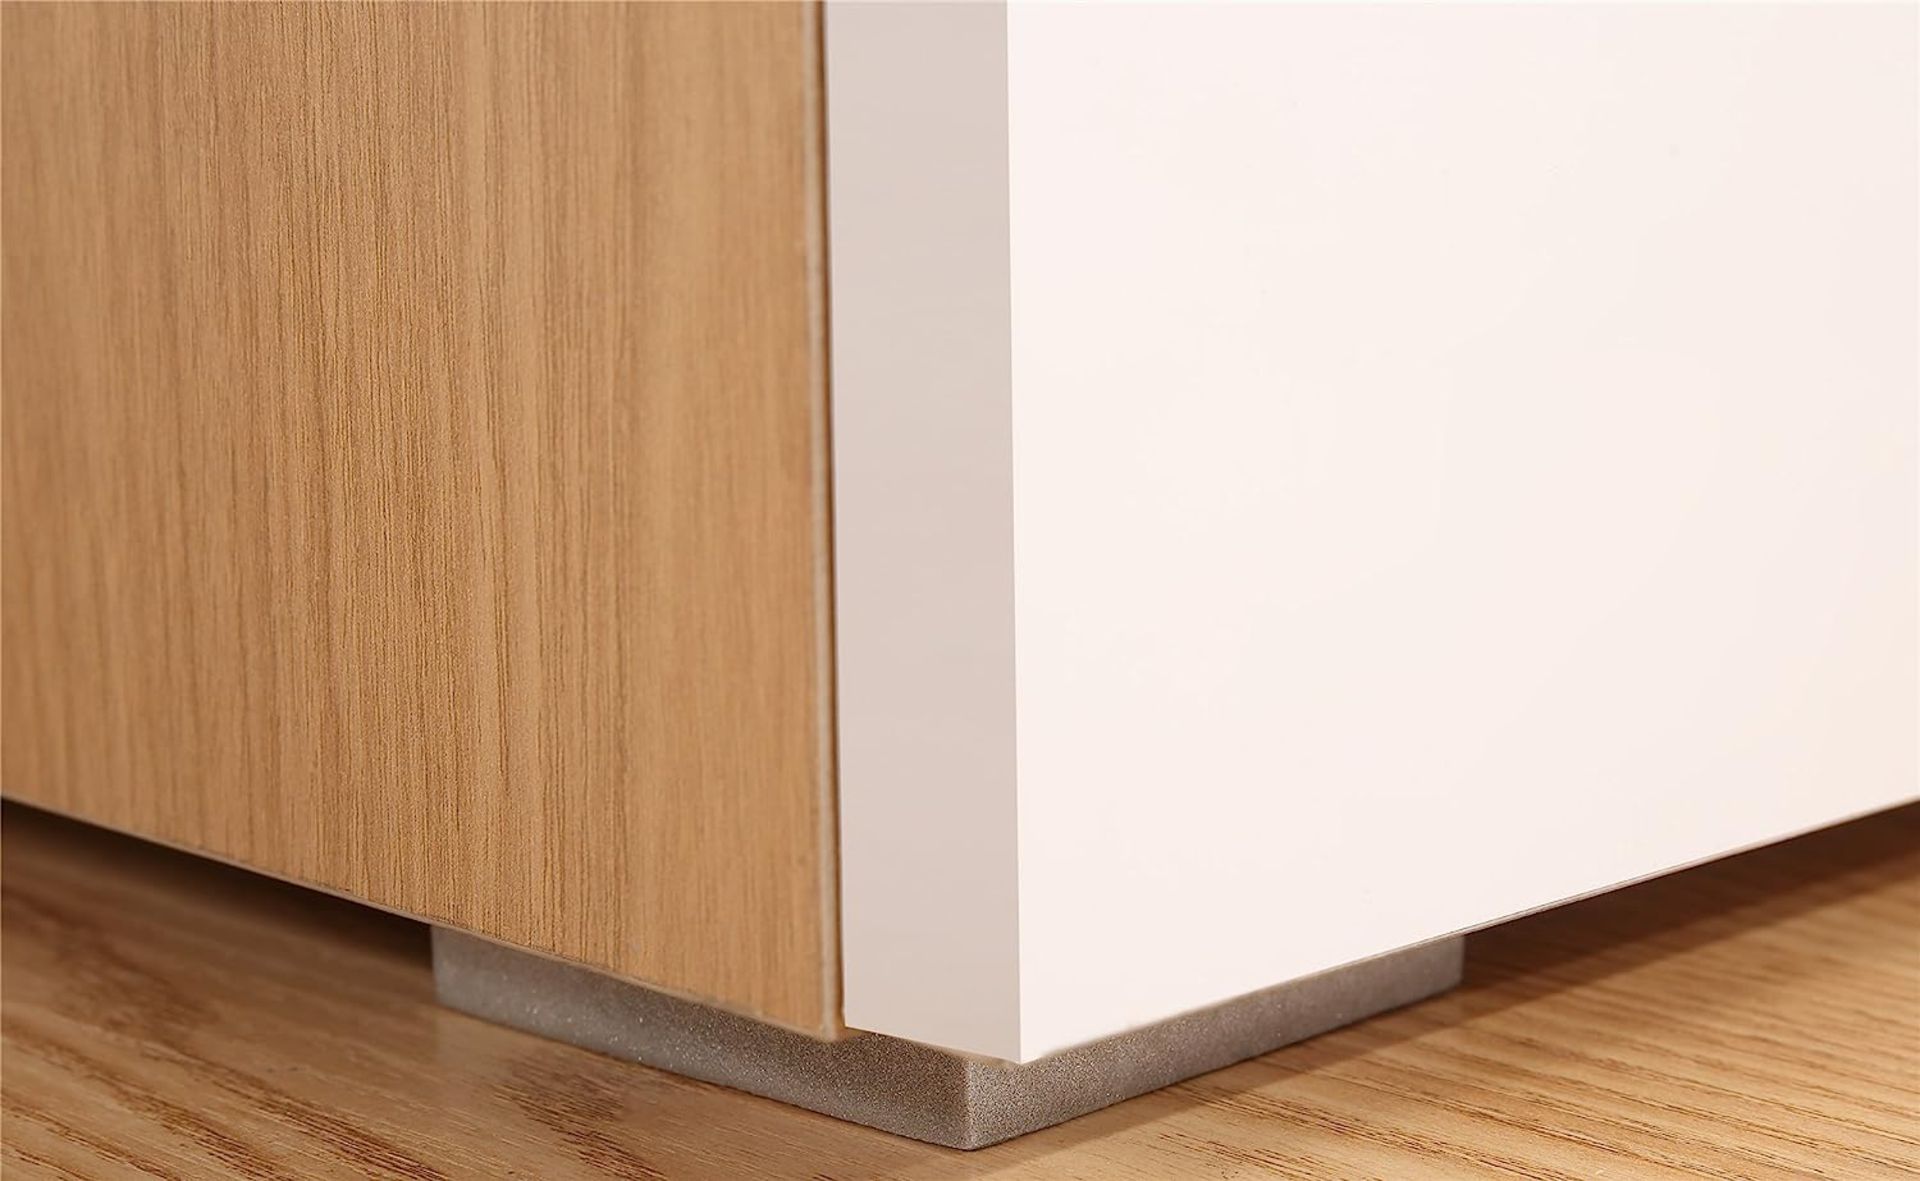 HARMIN MODERN 160CM TV STAND CABINET UNIT WITH HIGH GLOSS DOORS (WHITE ON OAK) - Image 9 of 9